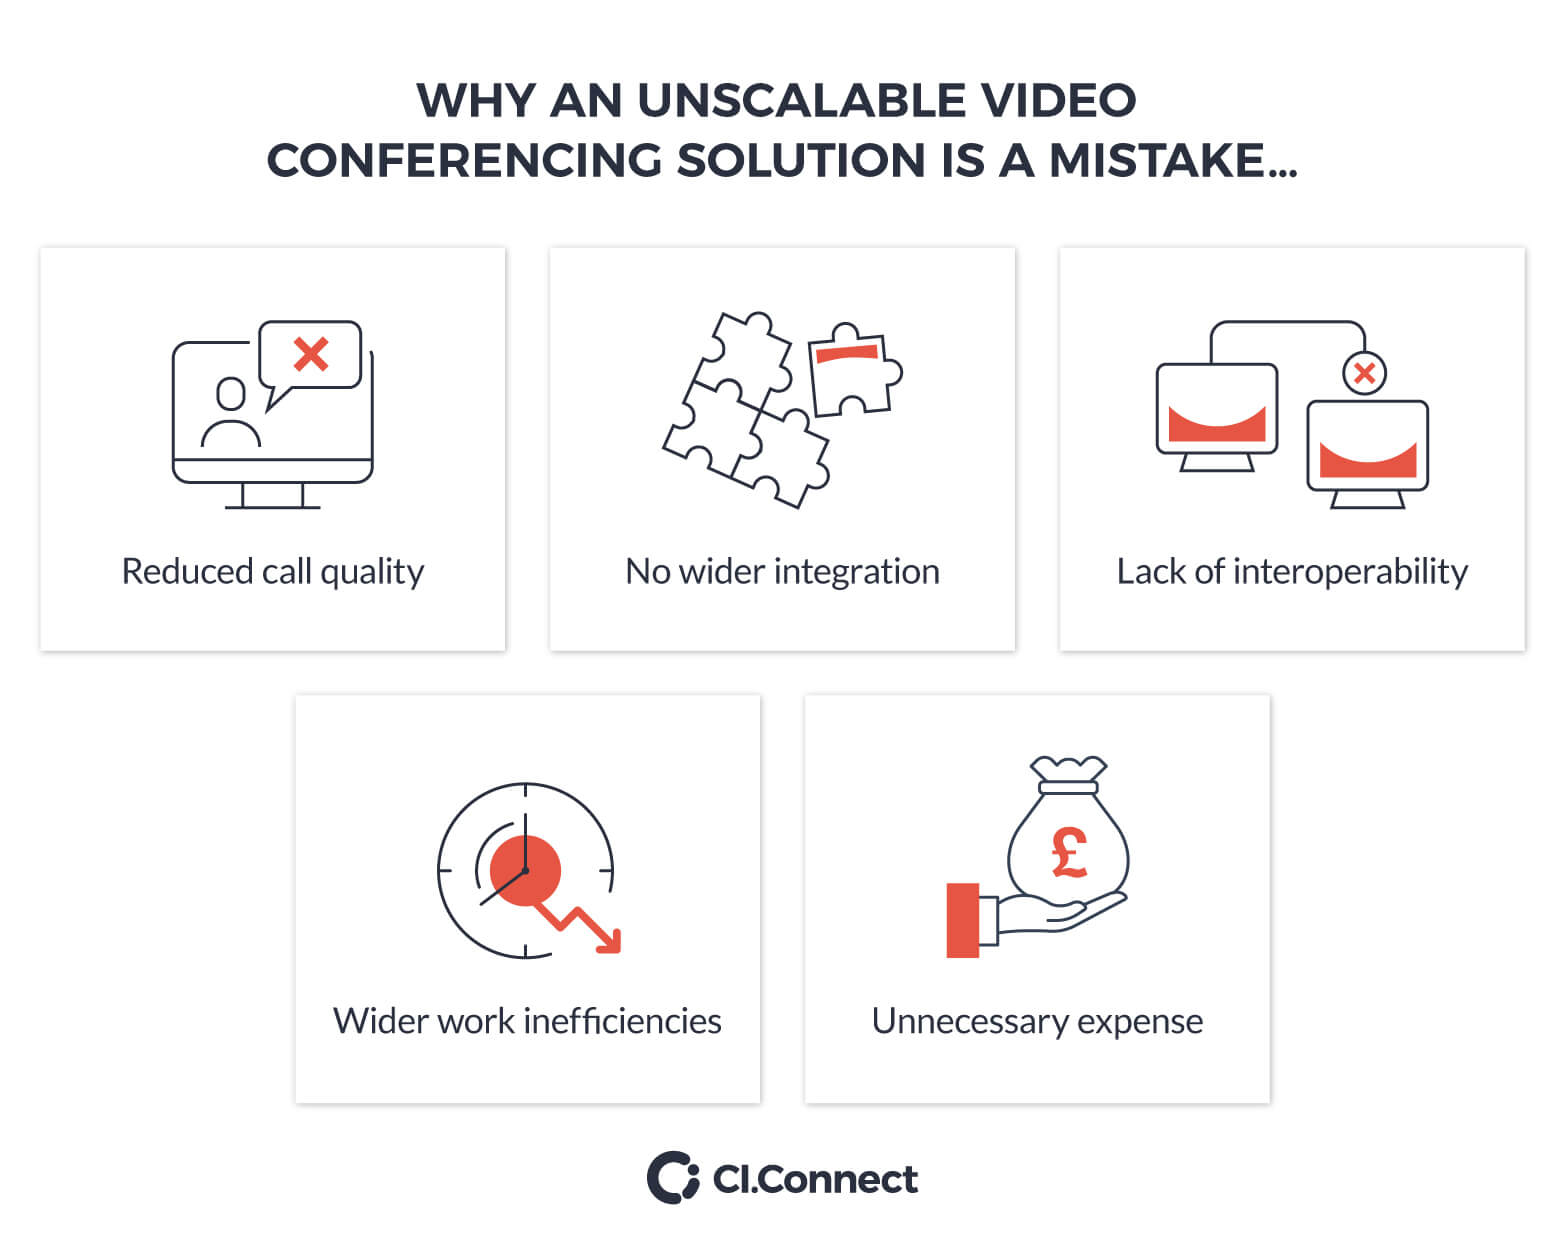 Why an unscalable video conferencing solution is a mistake